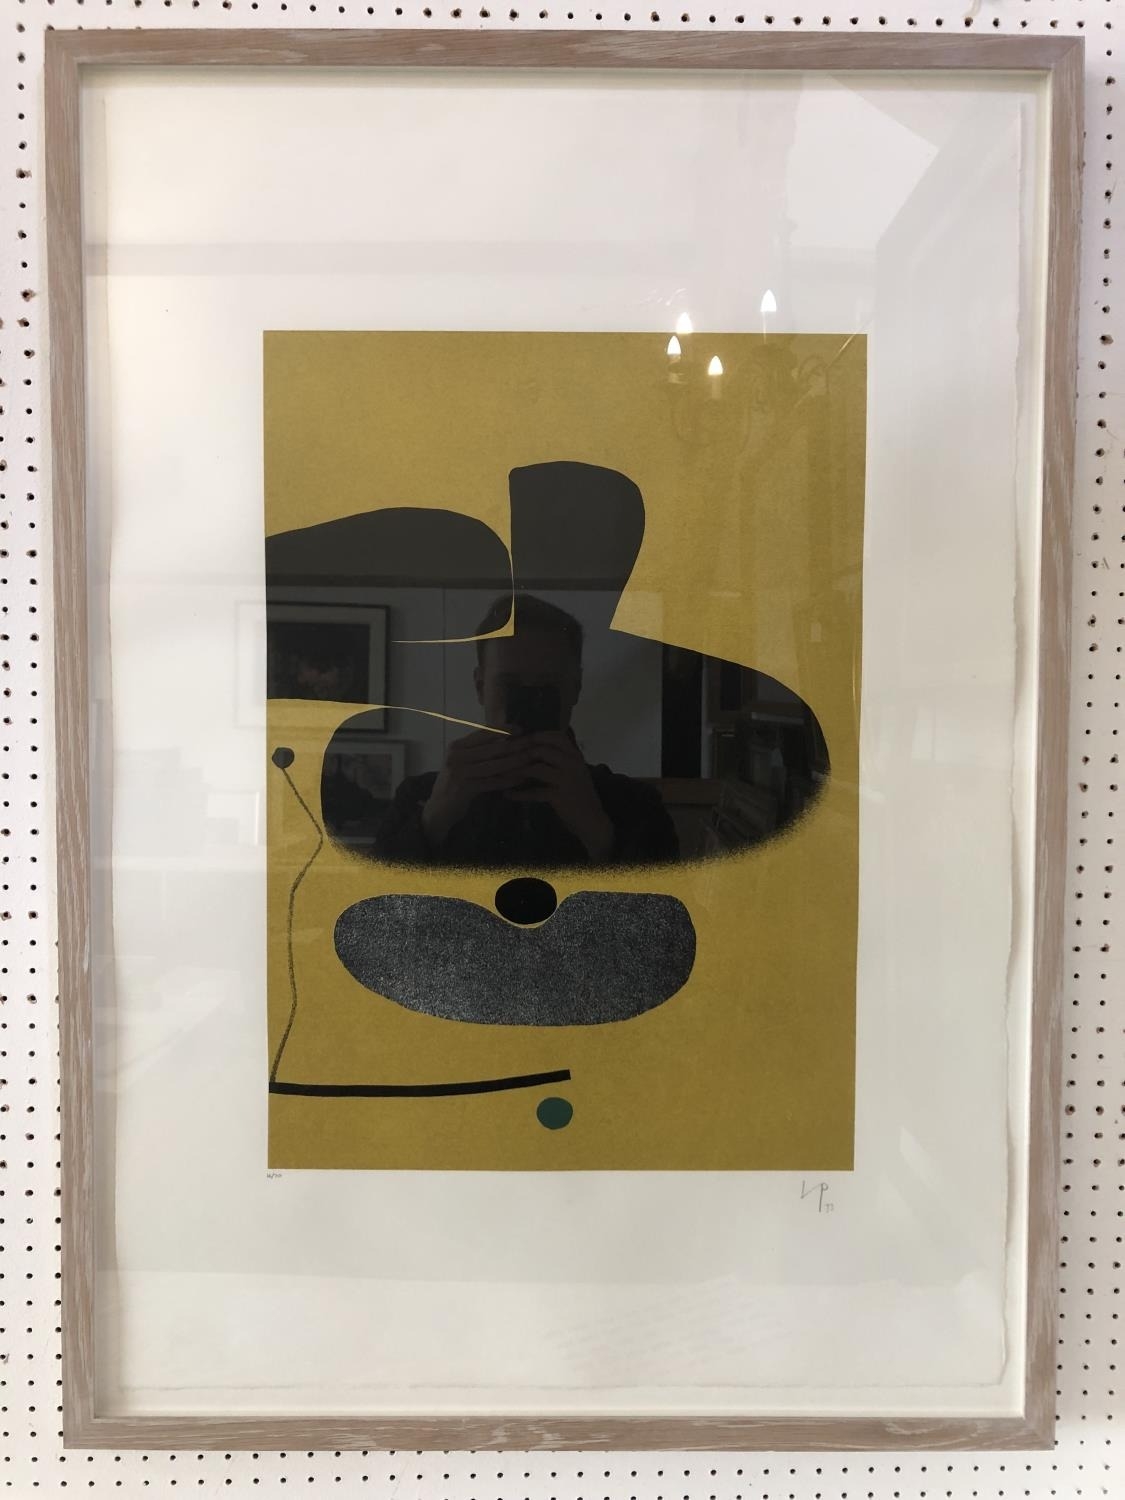 Victor Pasmore (British, 1908-1998) - 'Points of Contact No. 18' (1973), limited edition screenprint